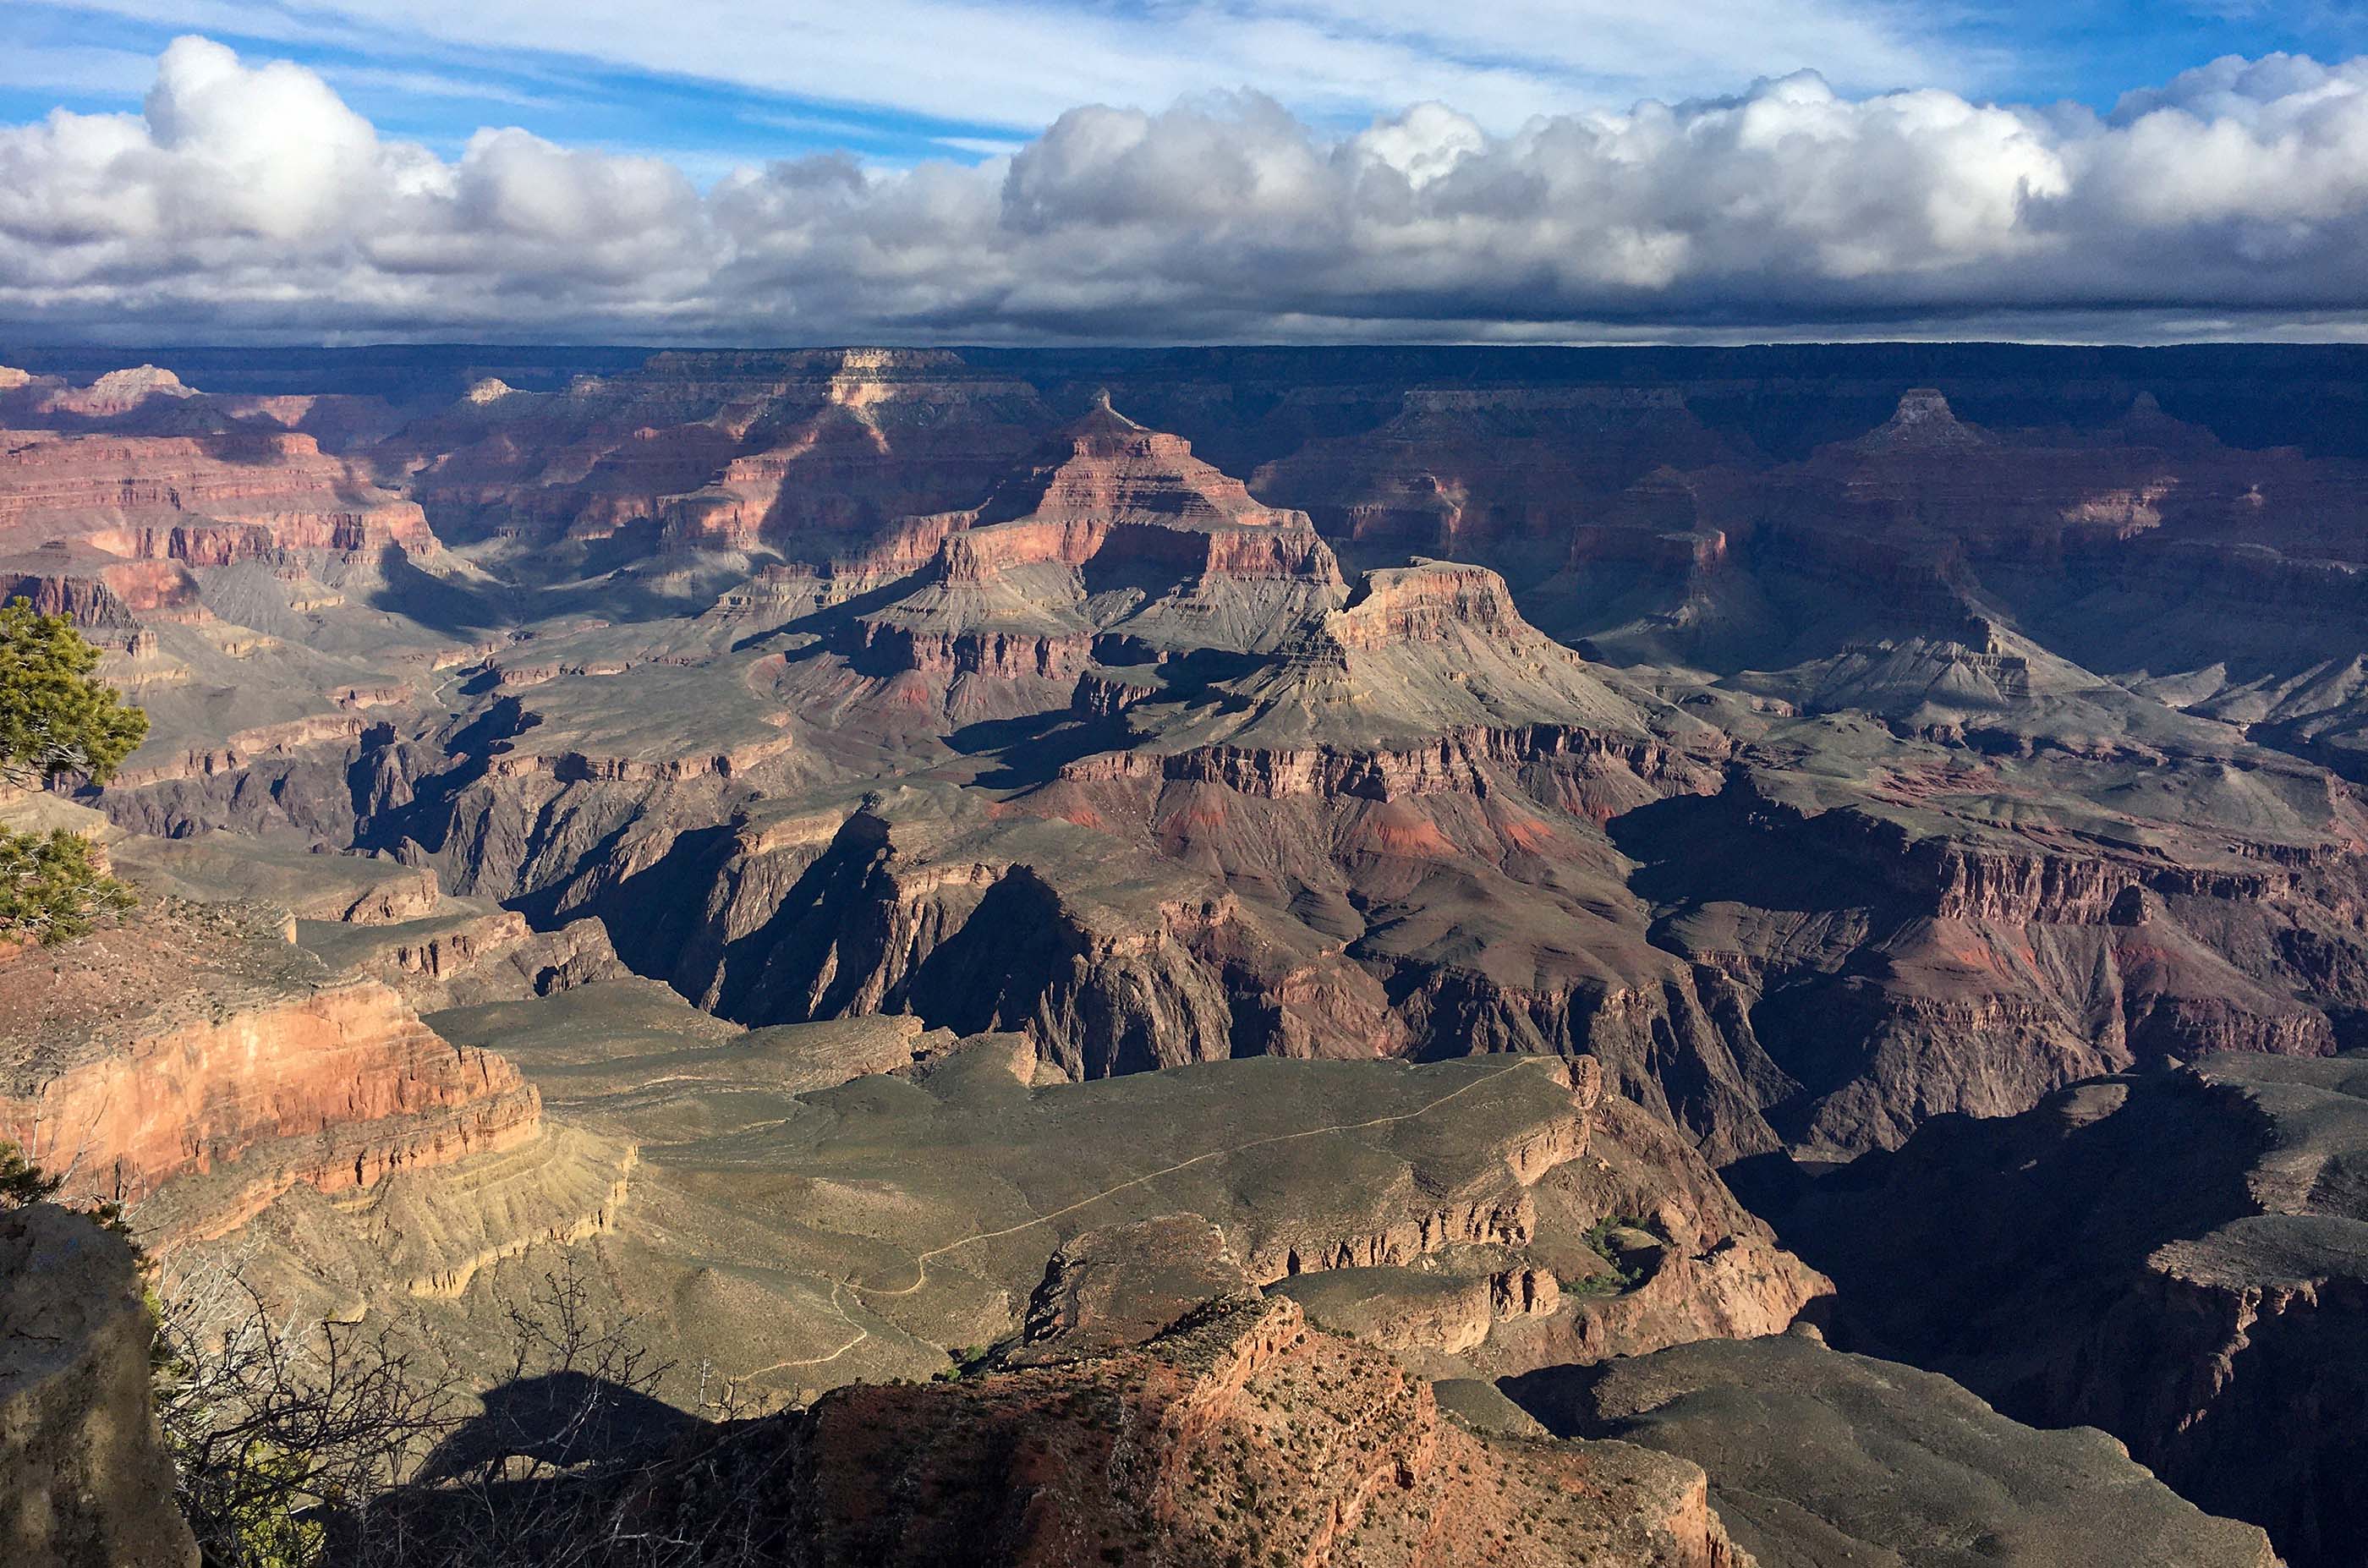 looking down across a plateau within a vast canyon with colorful peaks rising thousands of feet above. Threatening storm clouds shadow the distant rim.